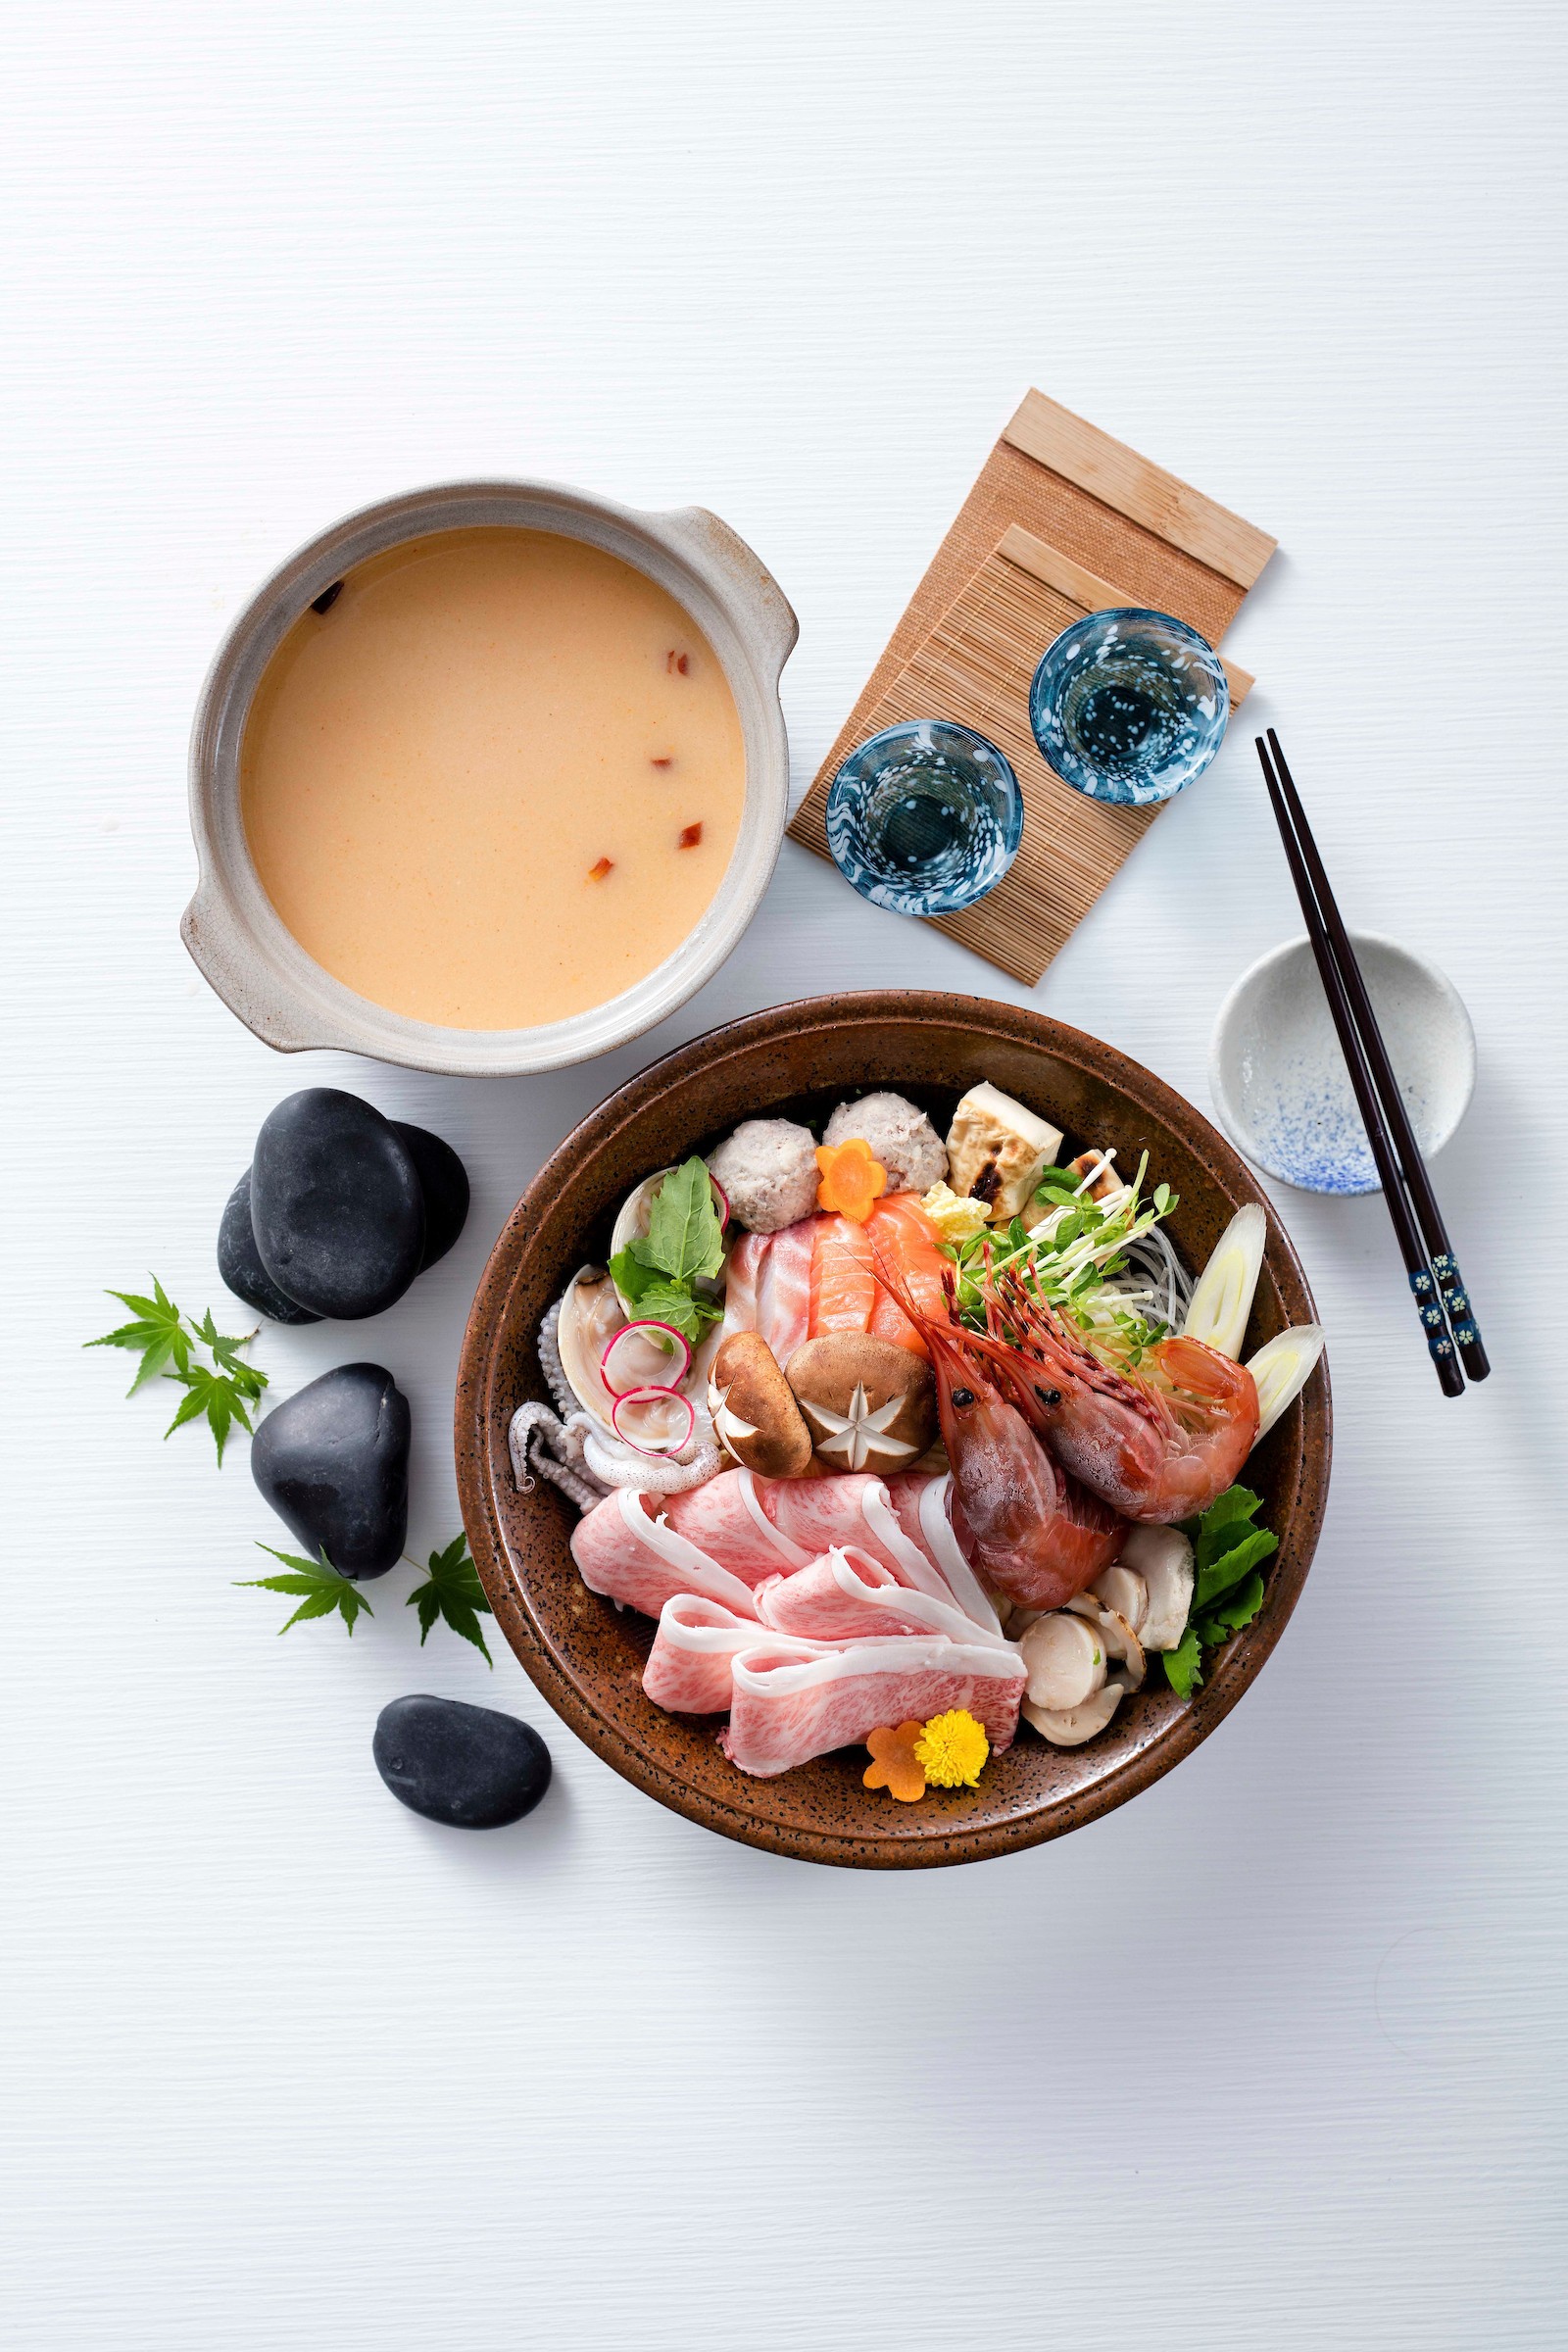 Chi Sasa offers a delicious taste of Japanese cuisine, including seafood and wagyu beef hot pot in spicy miso fish broth.